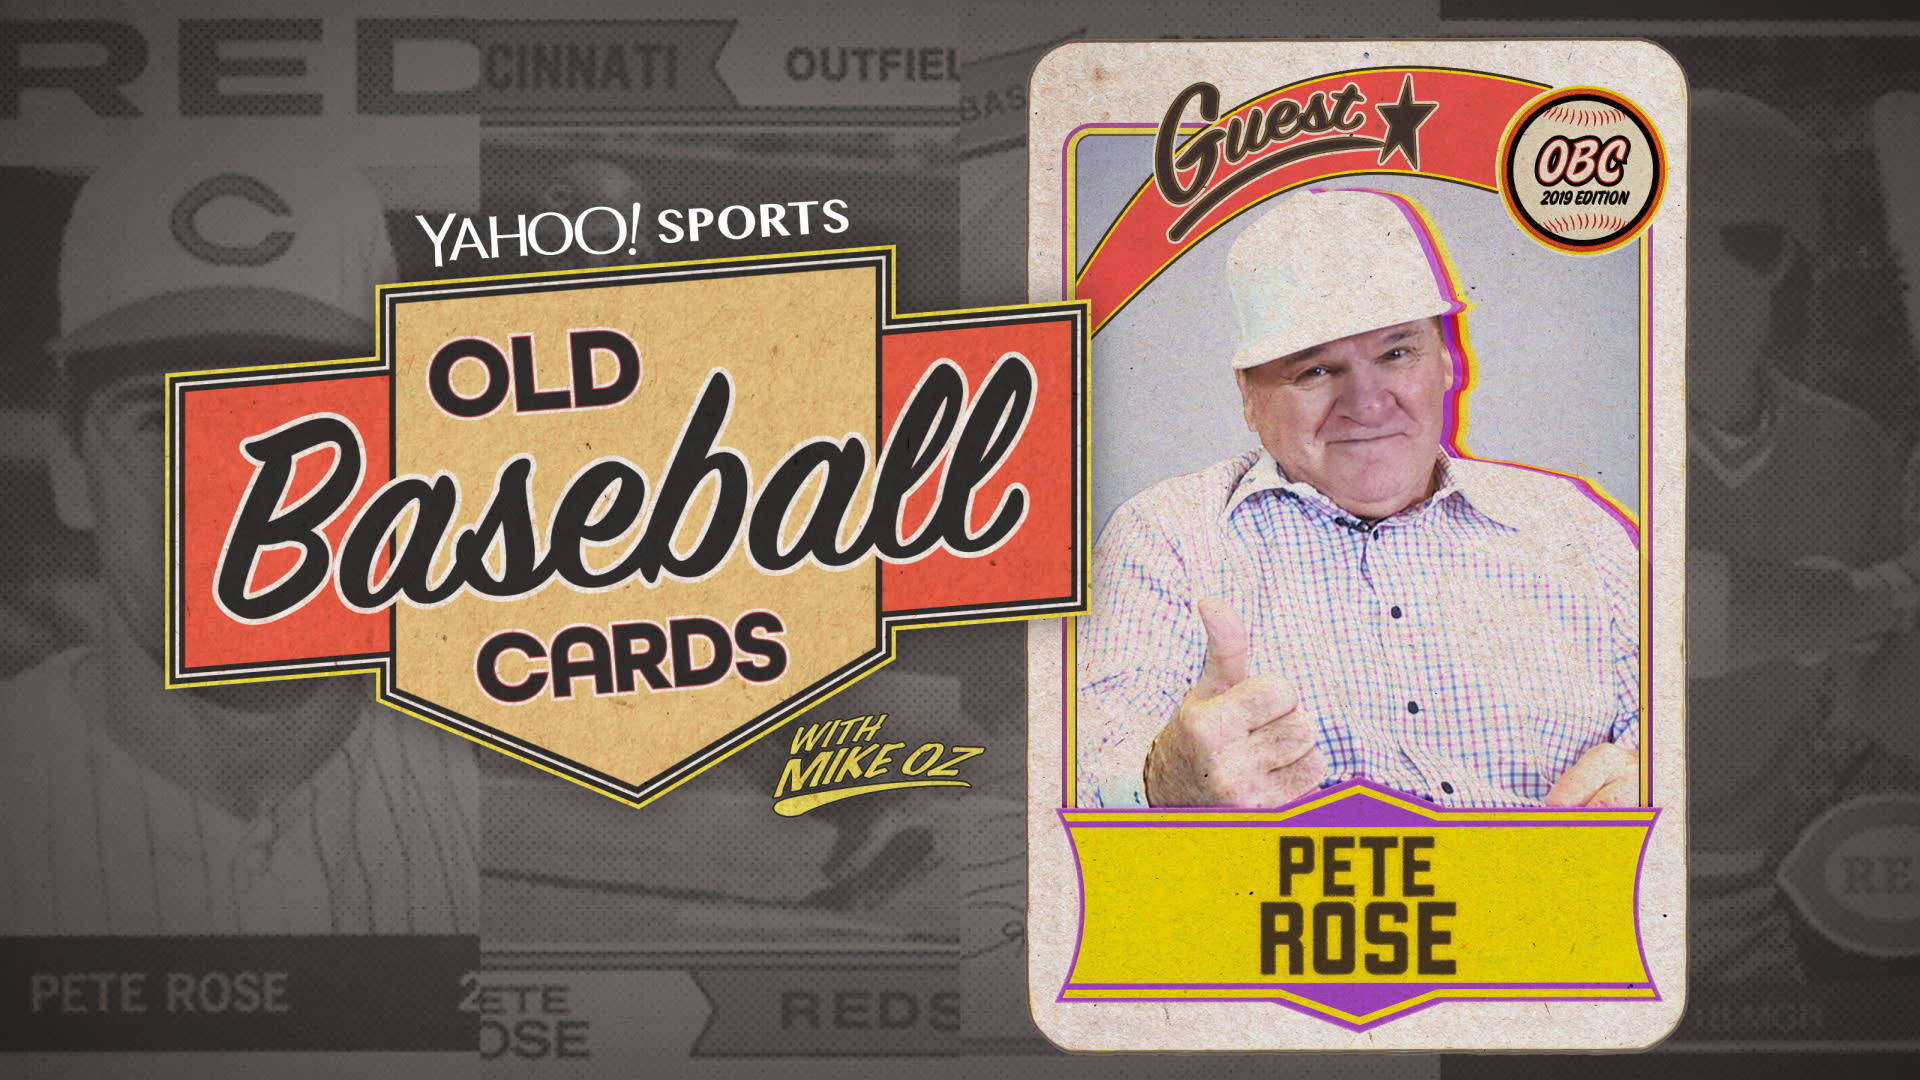 Pete Rose snubbed by Topps baseball cards